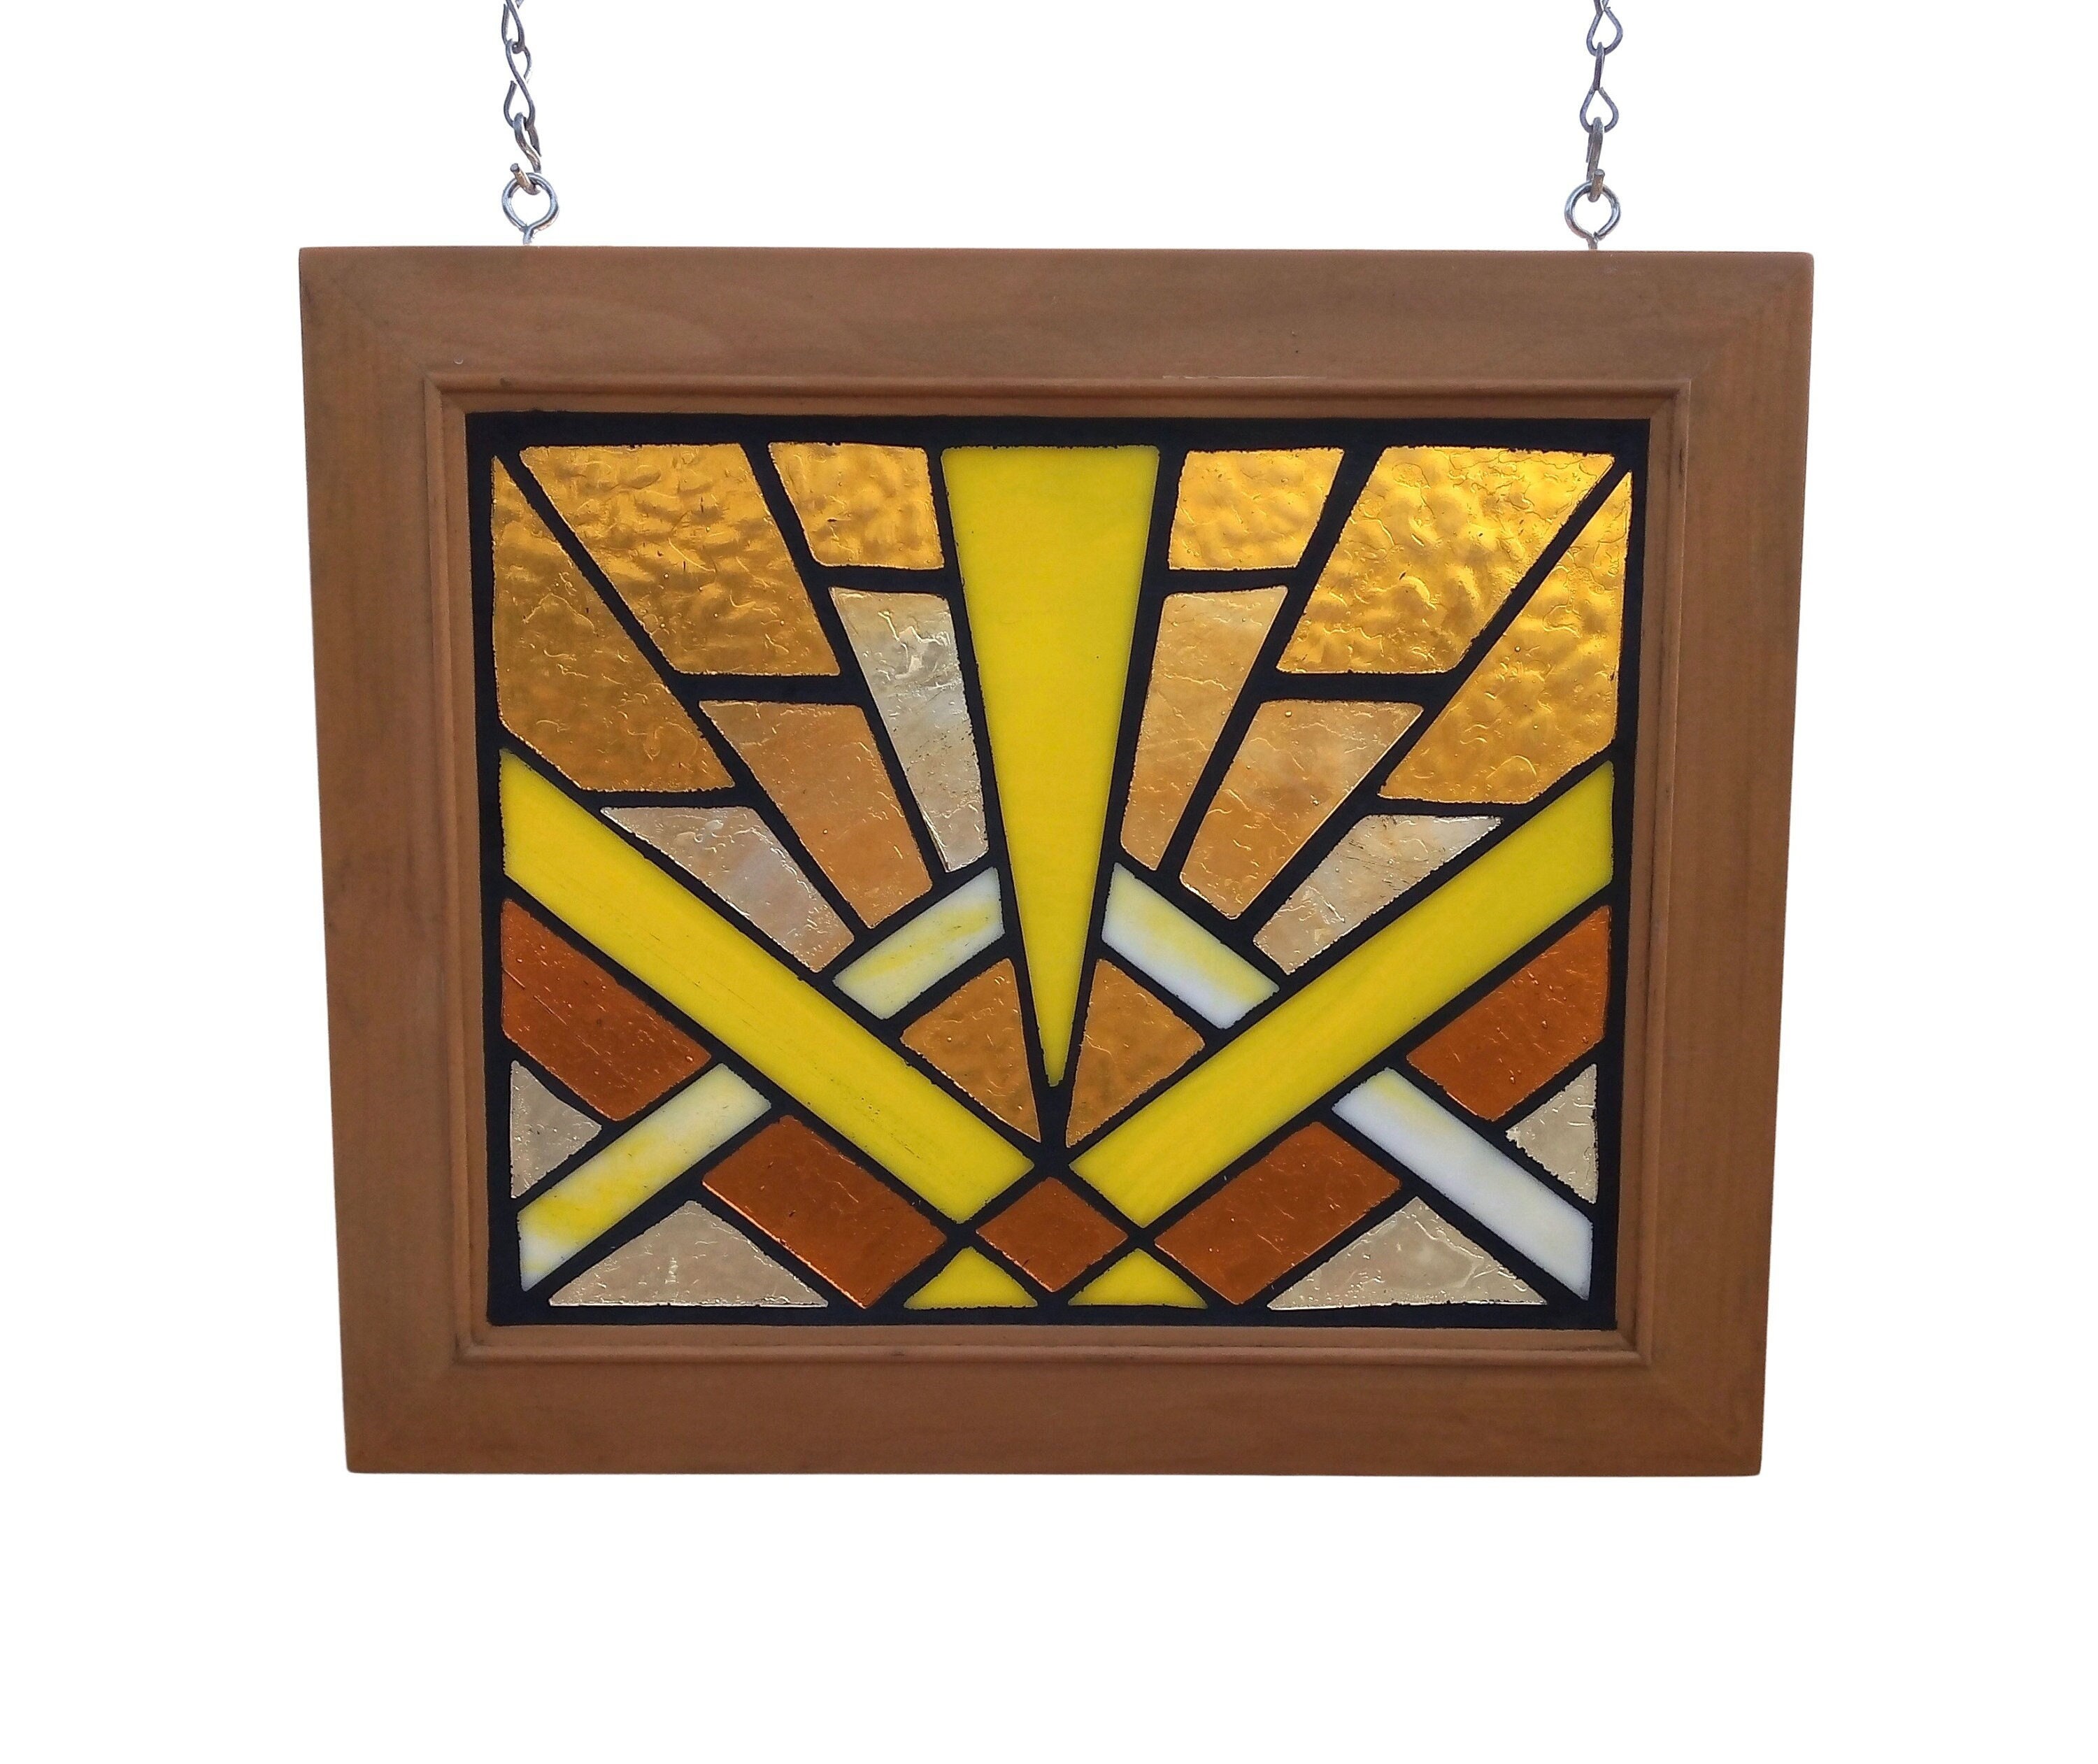 ZAG-ZAG MOSAIC CUTTER - PROFESSIONAL - Harmony Stained Glass